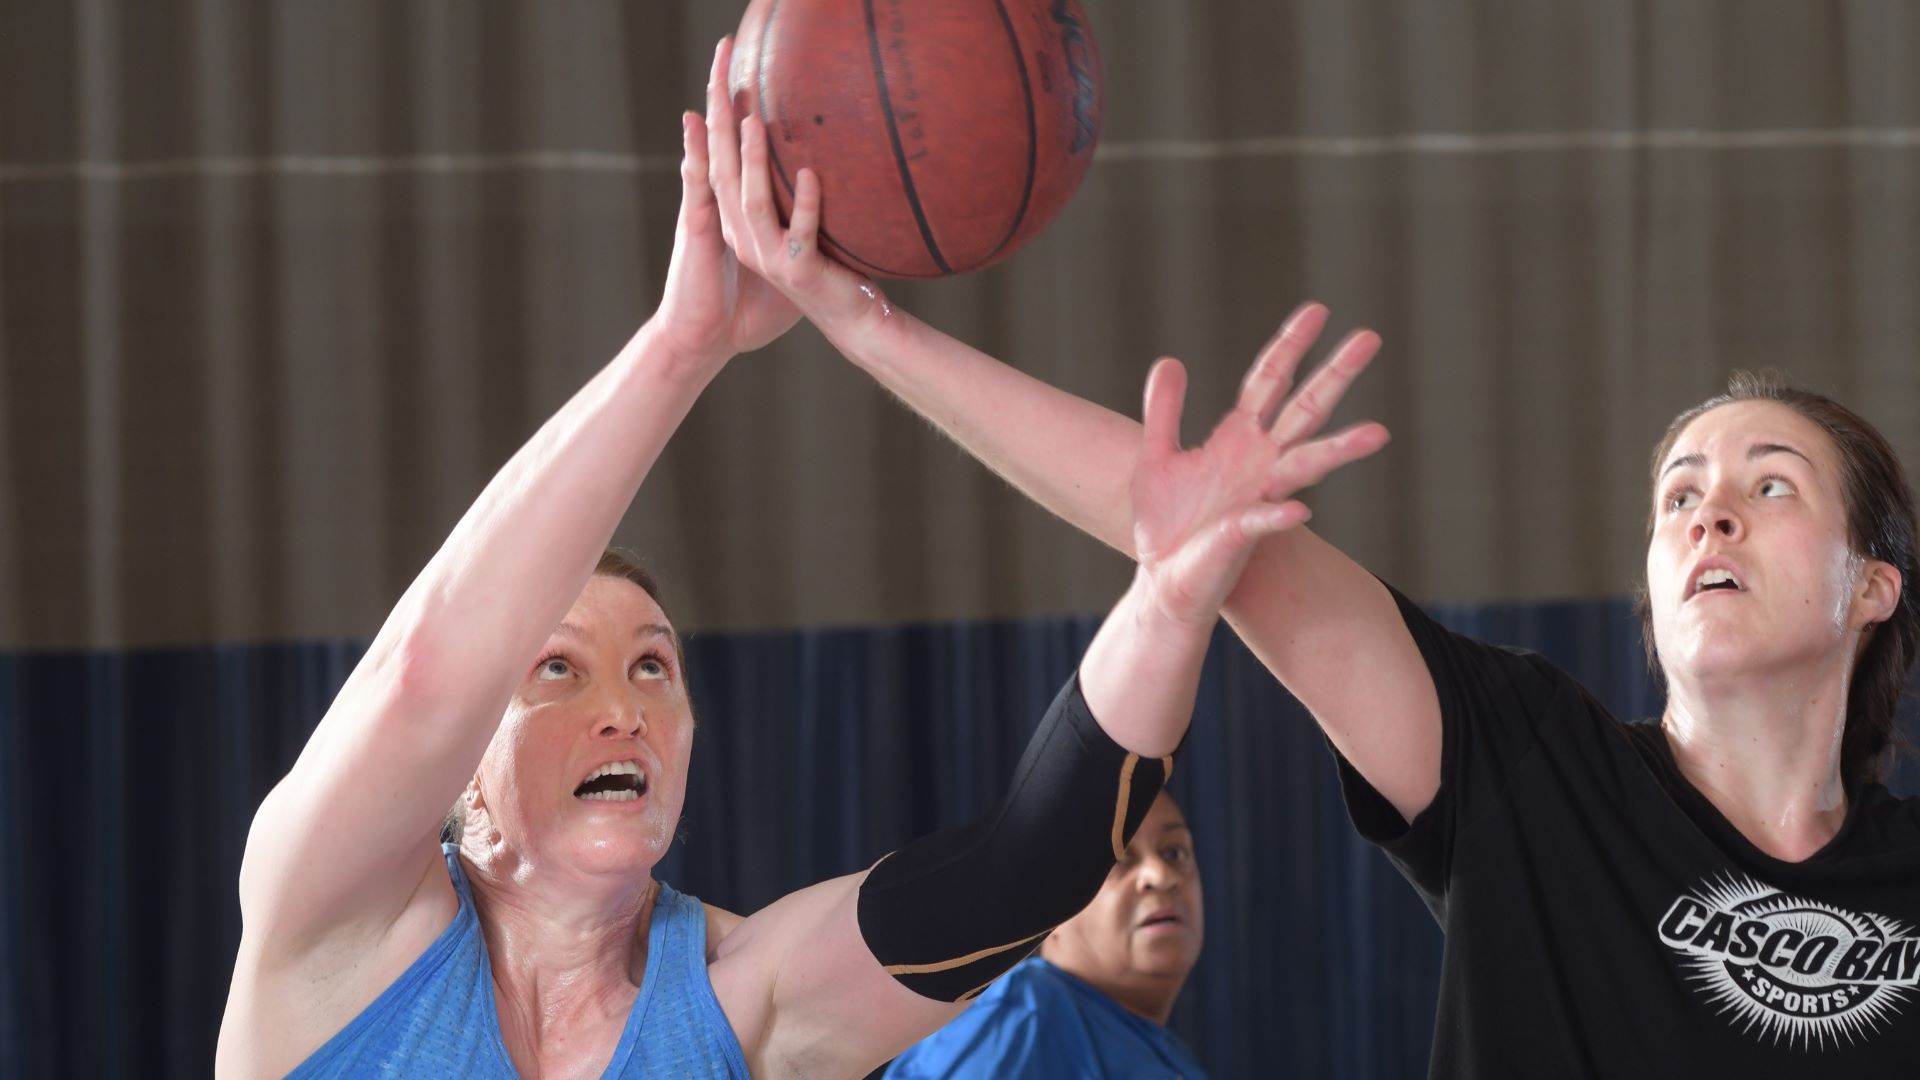 Maine woman’s best shot pays off in life and basketball